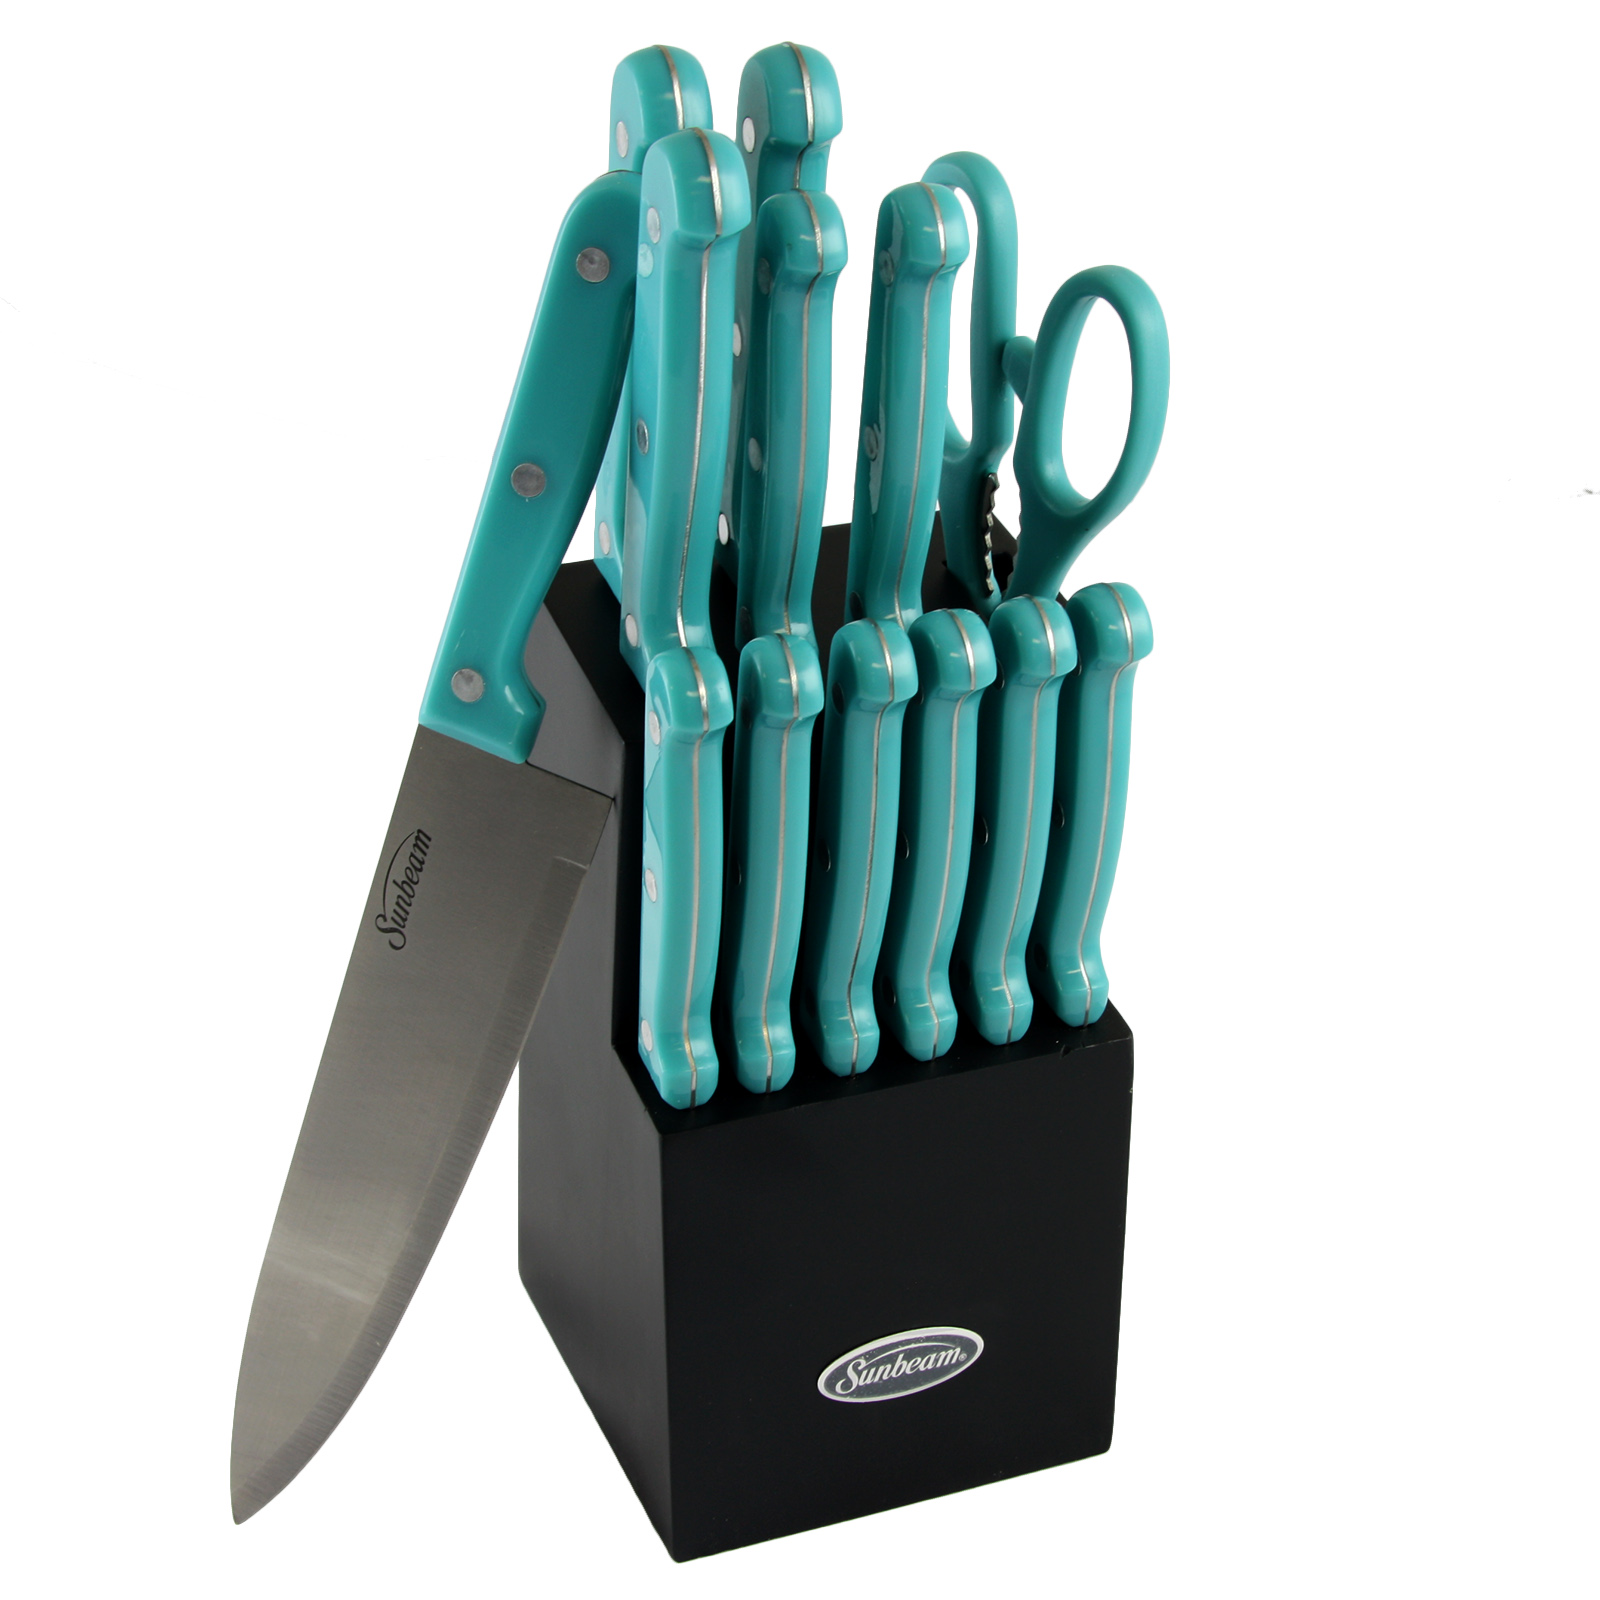 Sunbeam Bessemer 14-Piece Cutlery Set with Color Staines Wood Block ,Teal